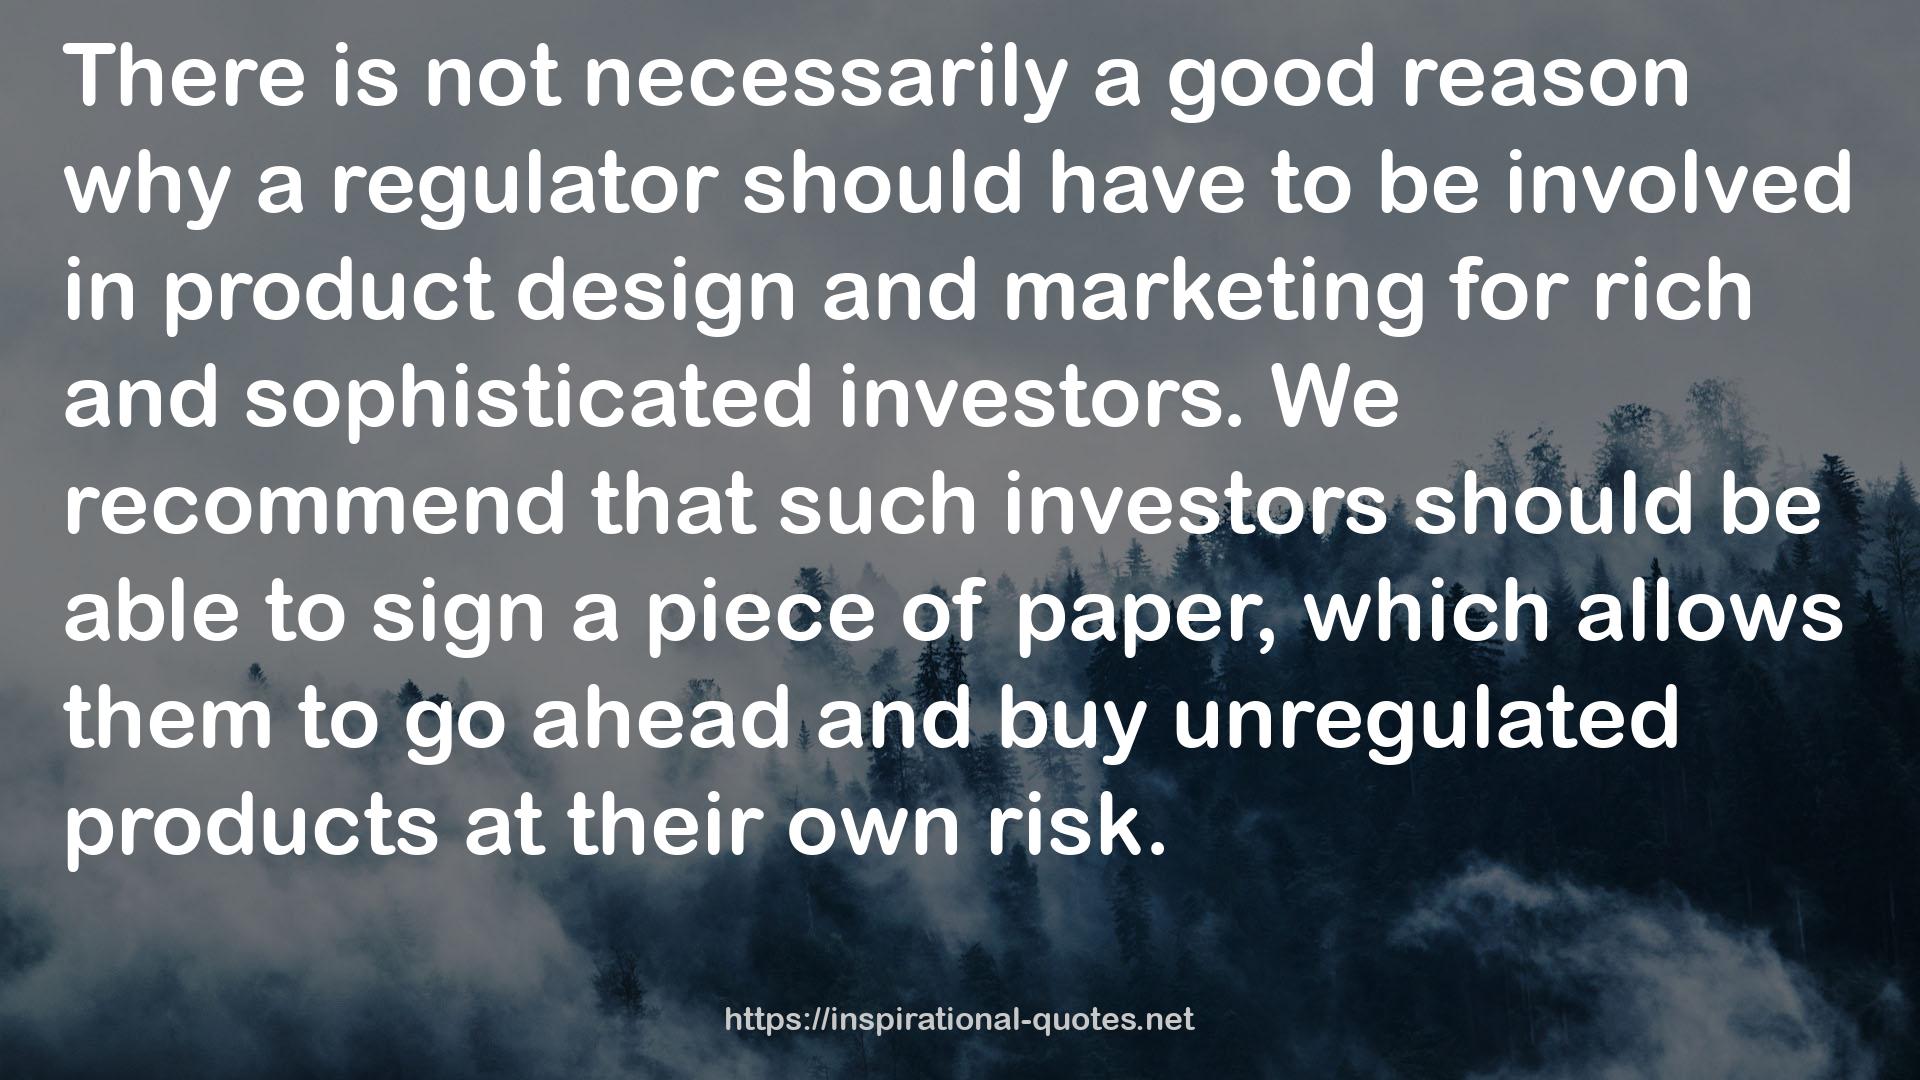 unregulated products  QUOTES